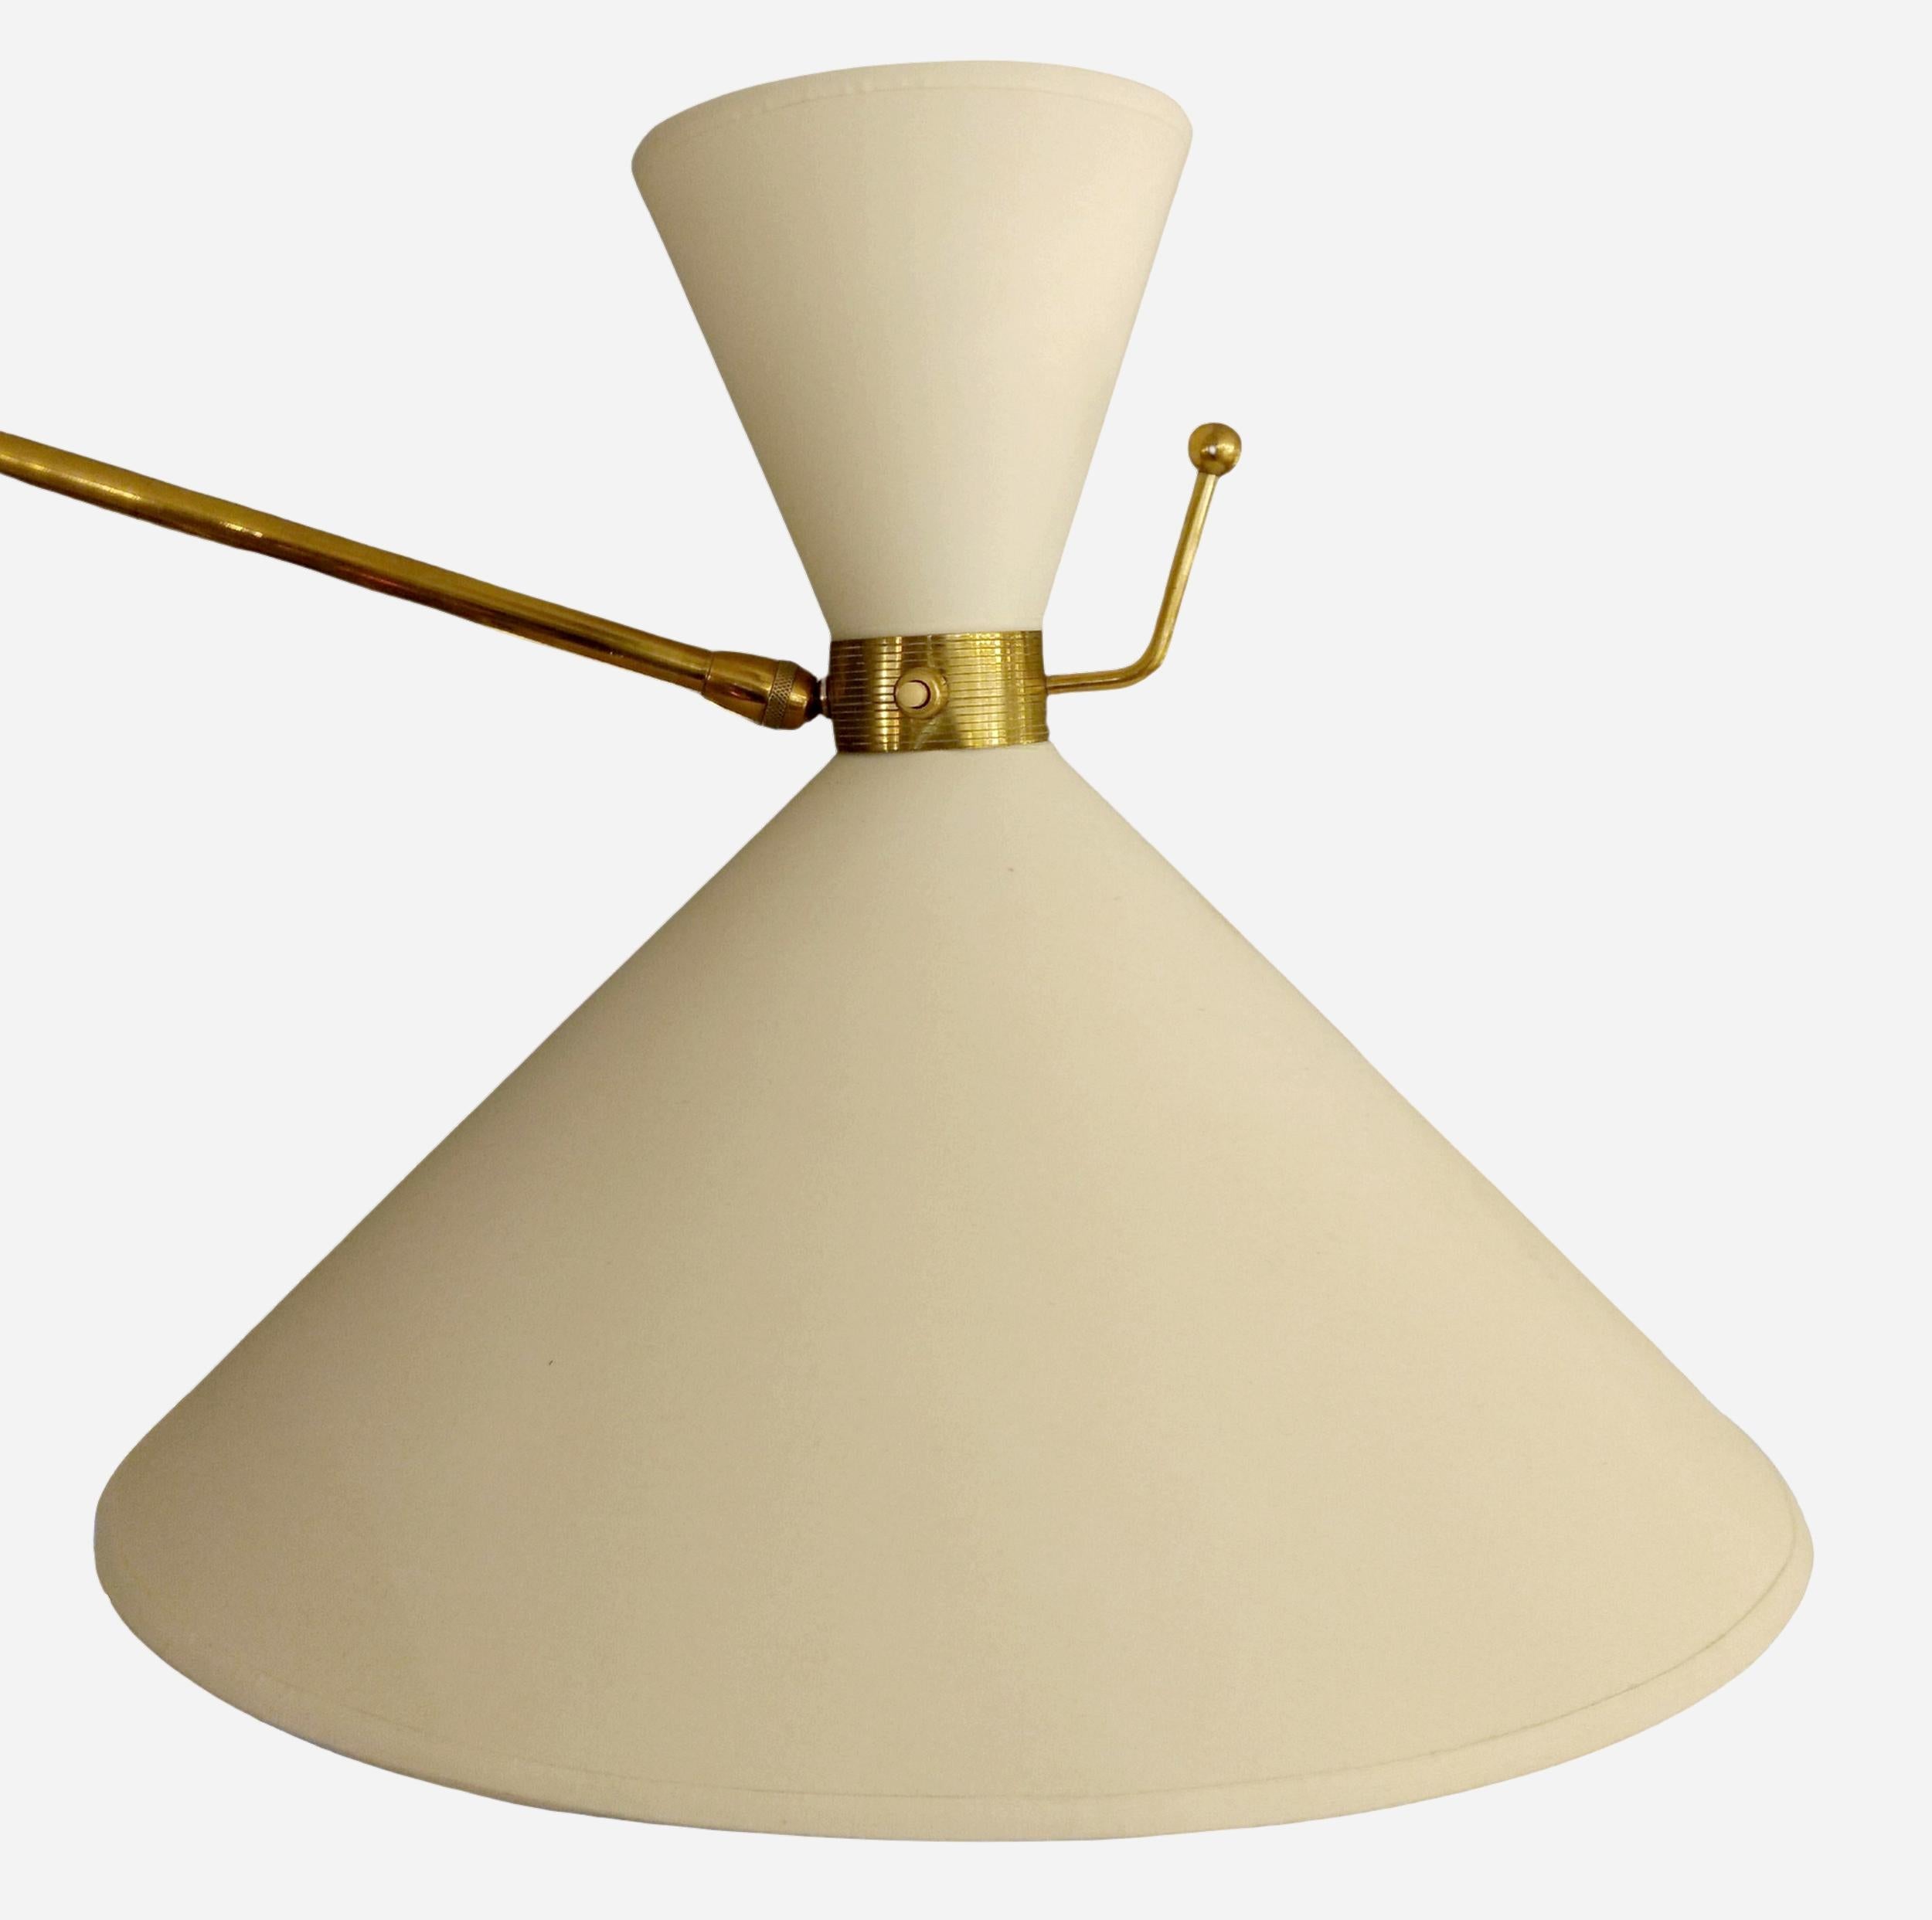 Large wall light, extendable and 180° rotatable, in black lacquered metal and polished brass.
The light arm rotates in the wall-mounted hook and can be extended. The lampshade is mounted on a ball-and-socket joint.
New lampshade and bulb cover,